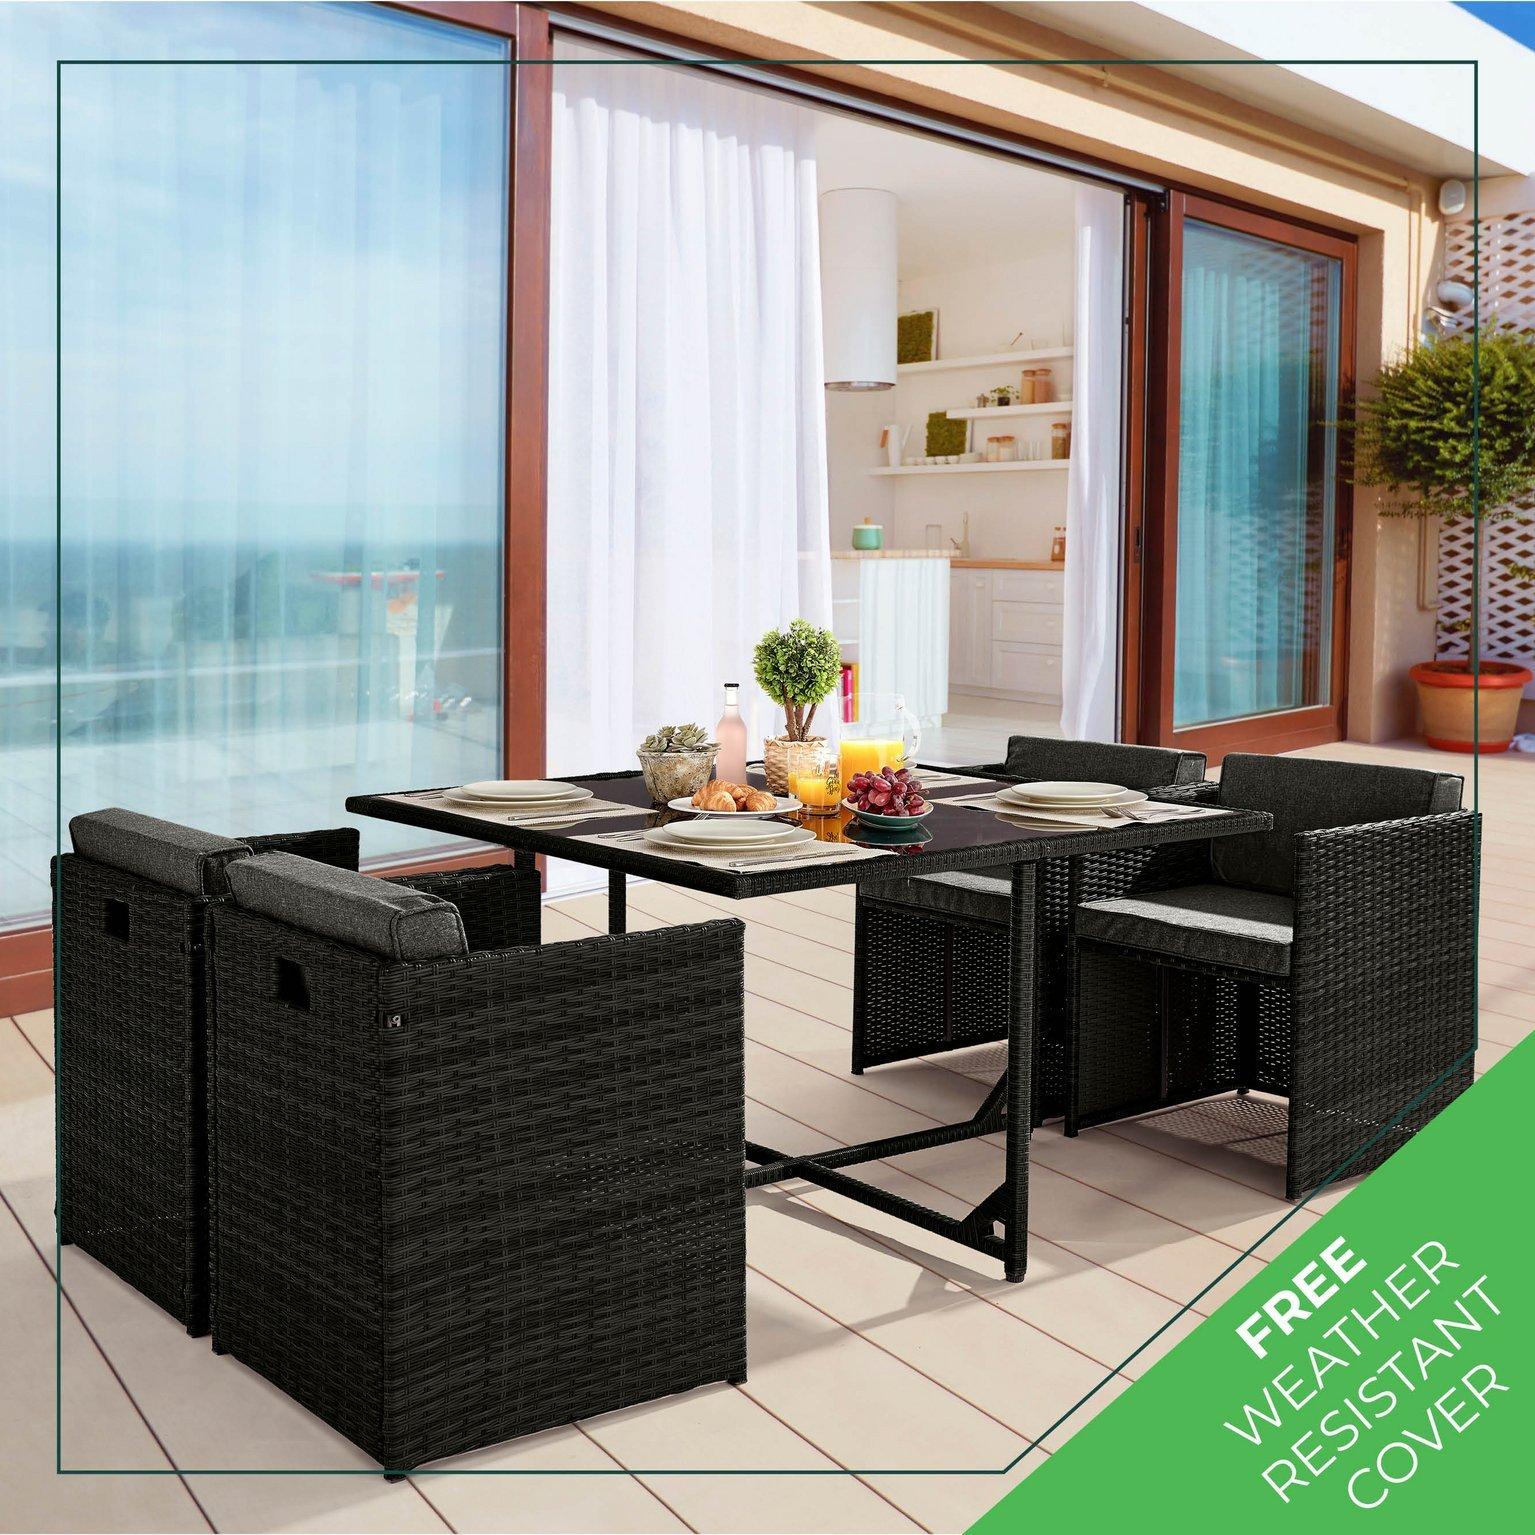 Rhodes Rattan Garden Outdoor 4 Seater Dining Table and Rattan Weave Chairs with Square Glass Top Tab